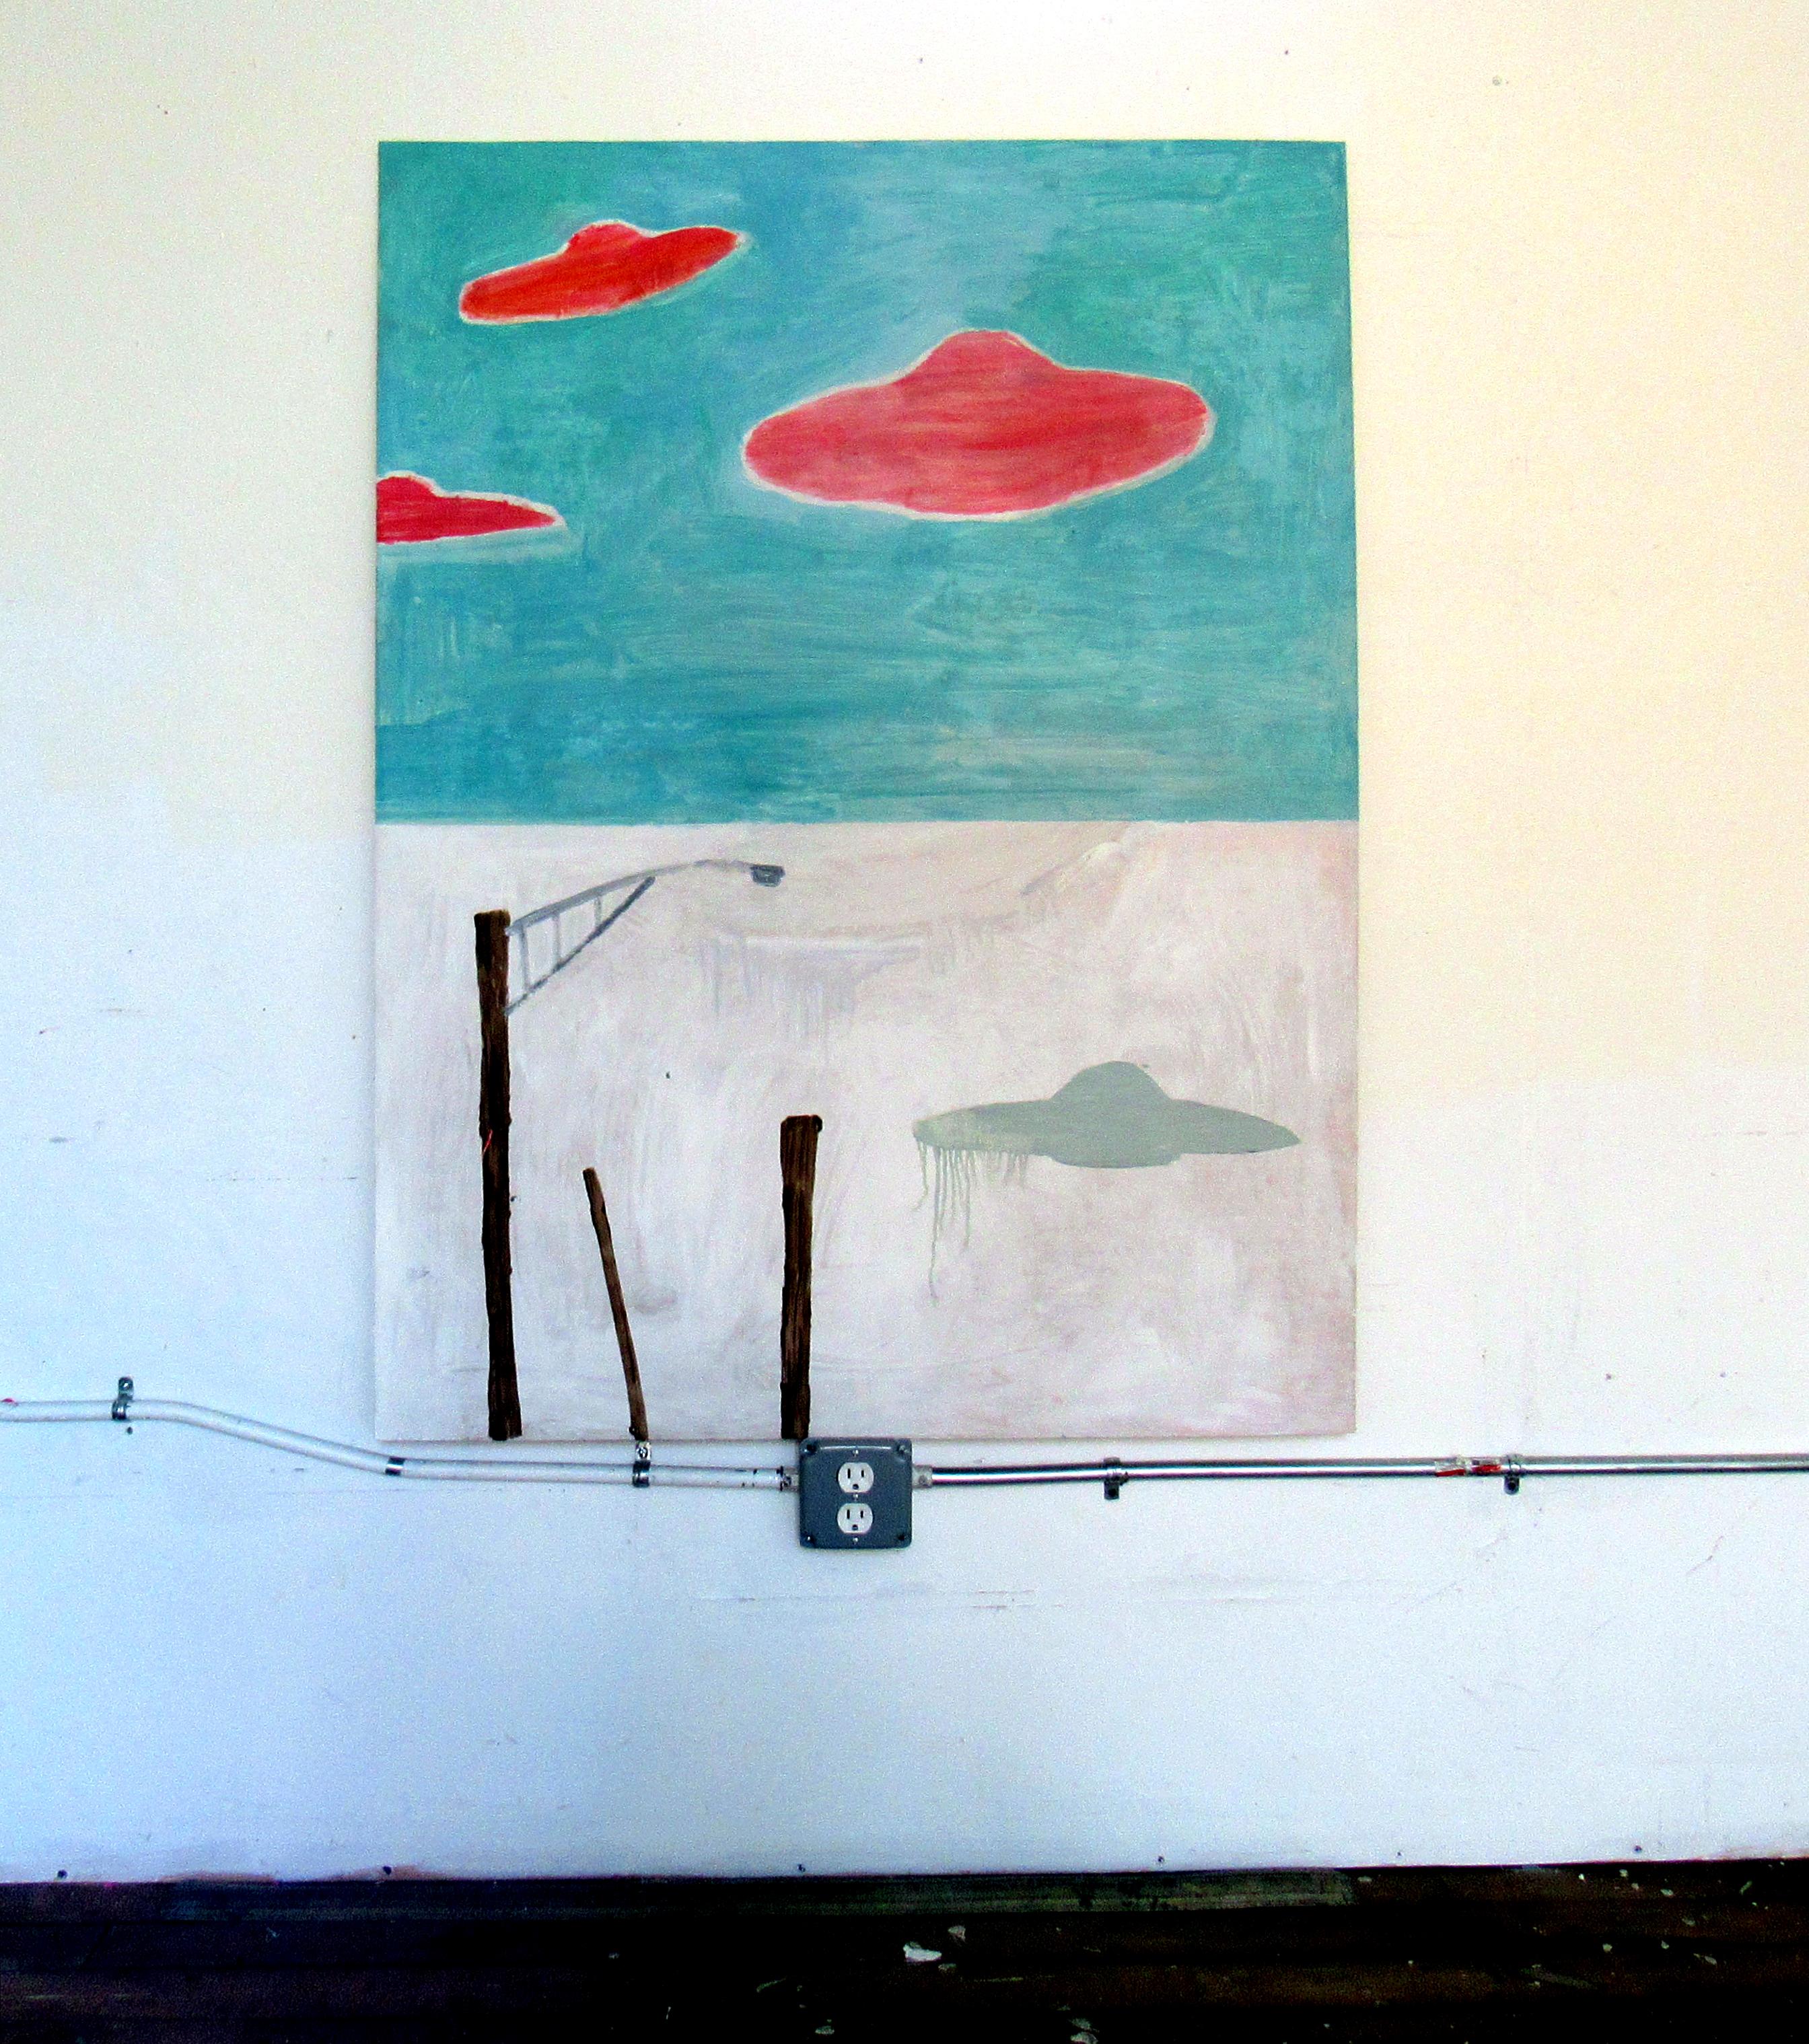 Landscape, colorful happy abstracted red flying saucers against turquoise sky - Painting by C. Dimitri